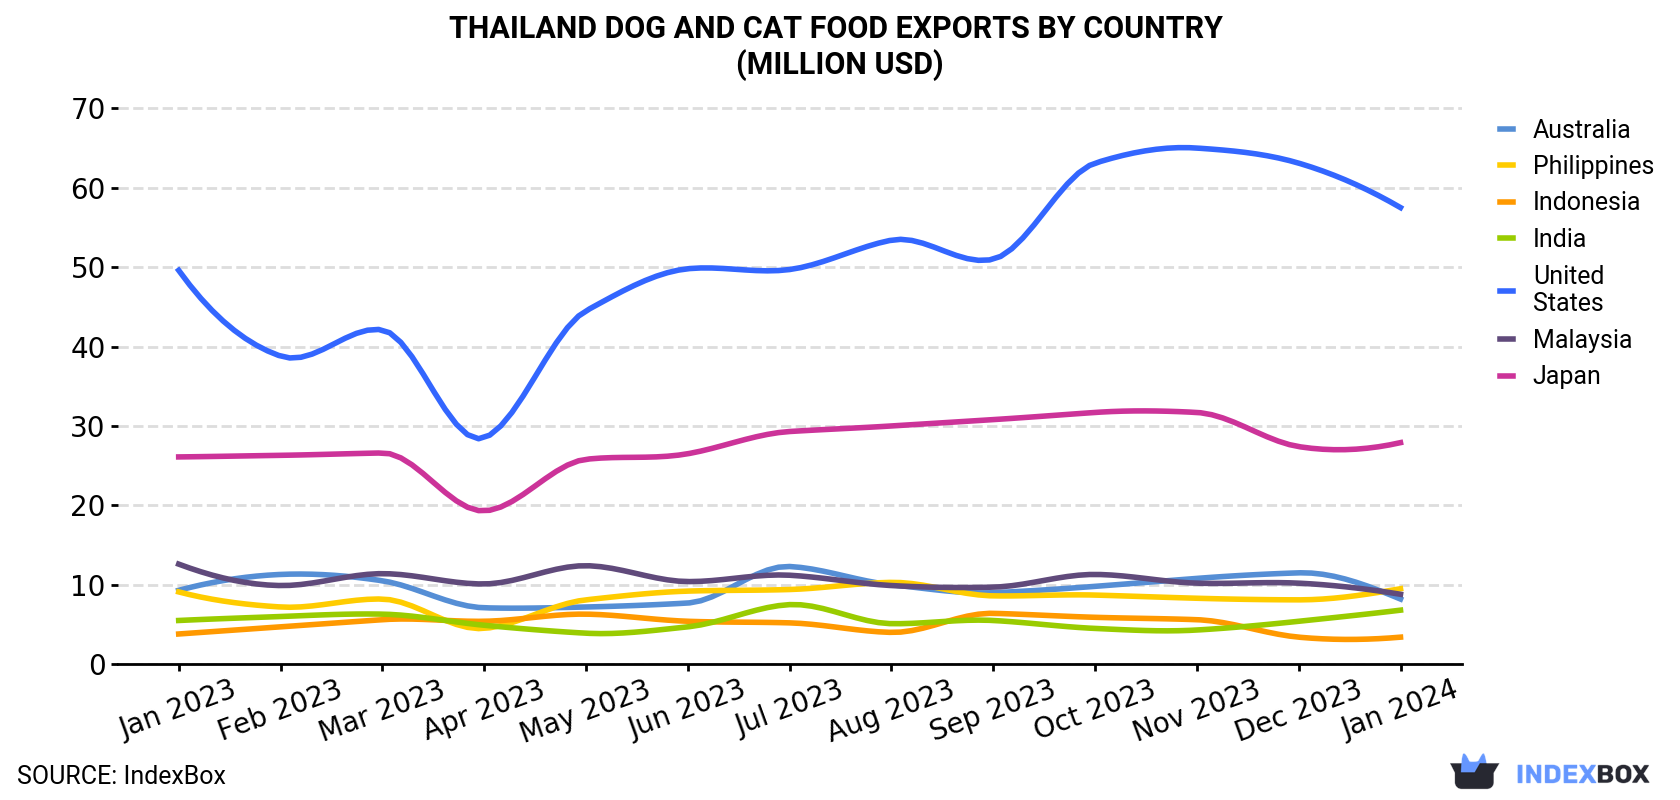 Thailand Dog And Cat Food Exports By Country (Million USD)